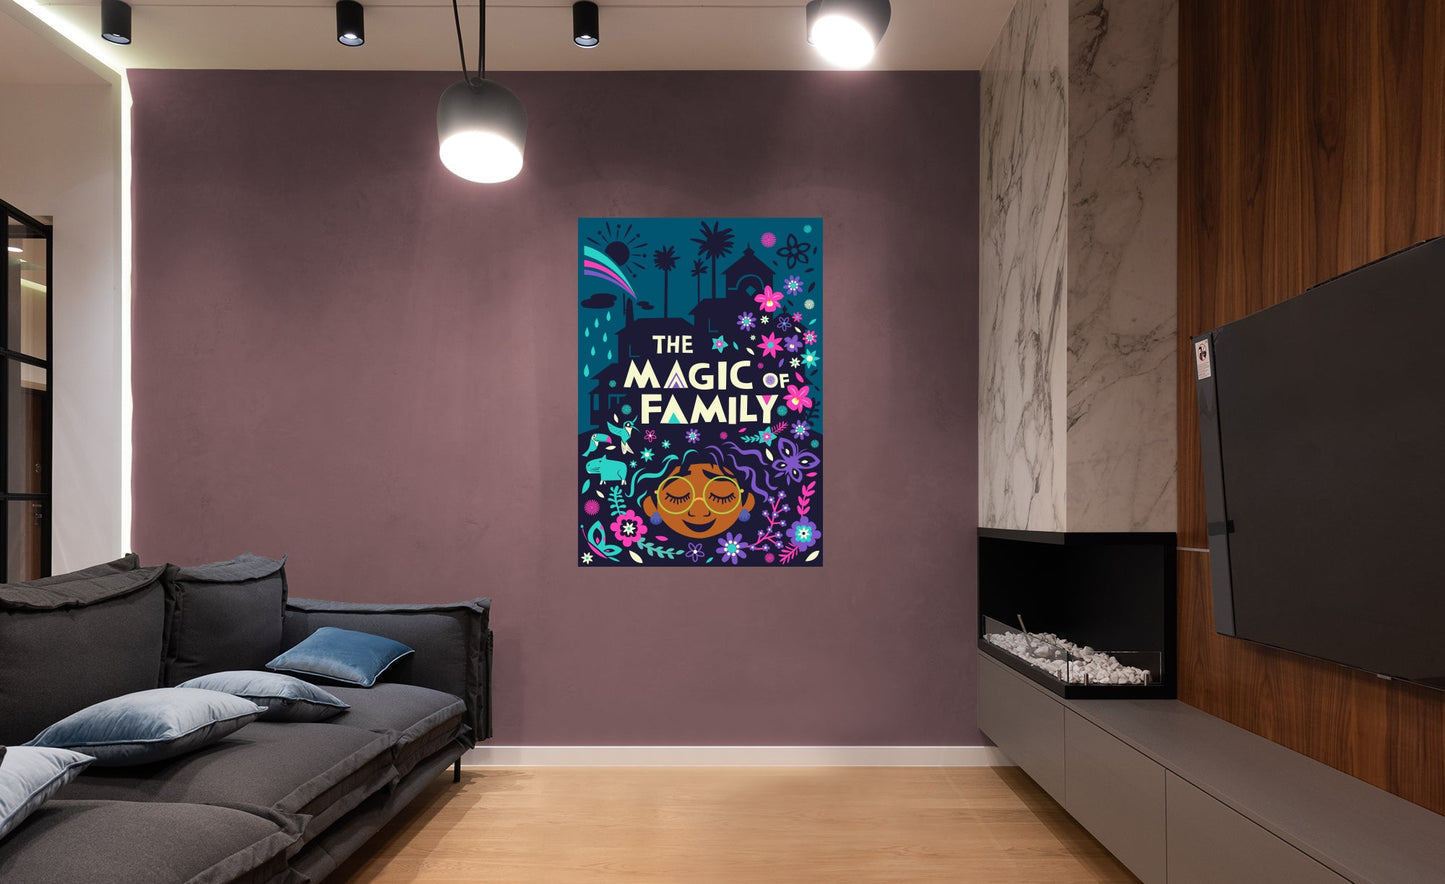 Encanto: Mirabel The Magic of Family Poster - Officially Licensed Disney Removable Adhesive Decal